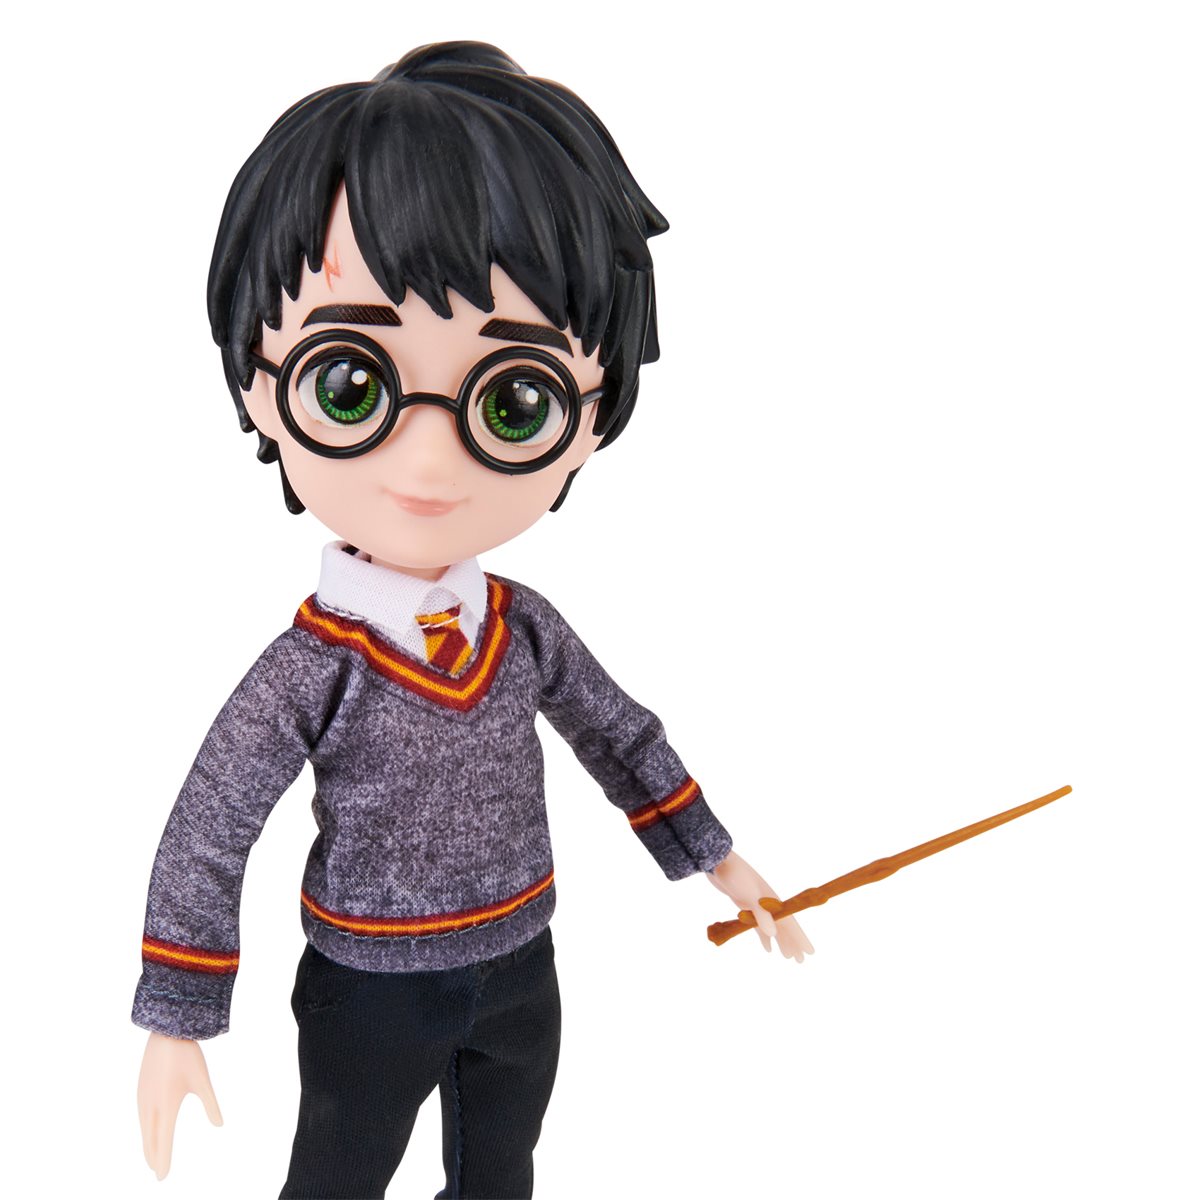 Wizarding World Harry Potter 8 Inch Mini Plush NEW Free Shipping Doll Toy 